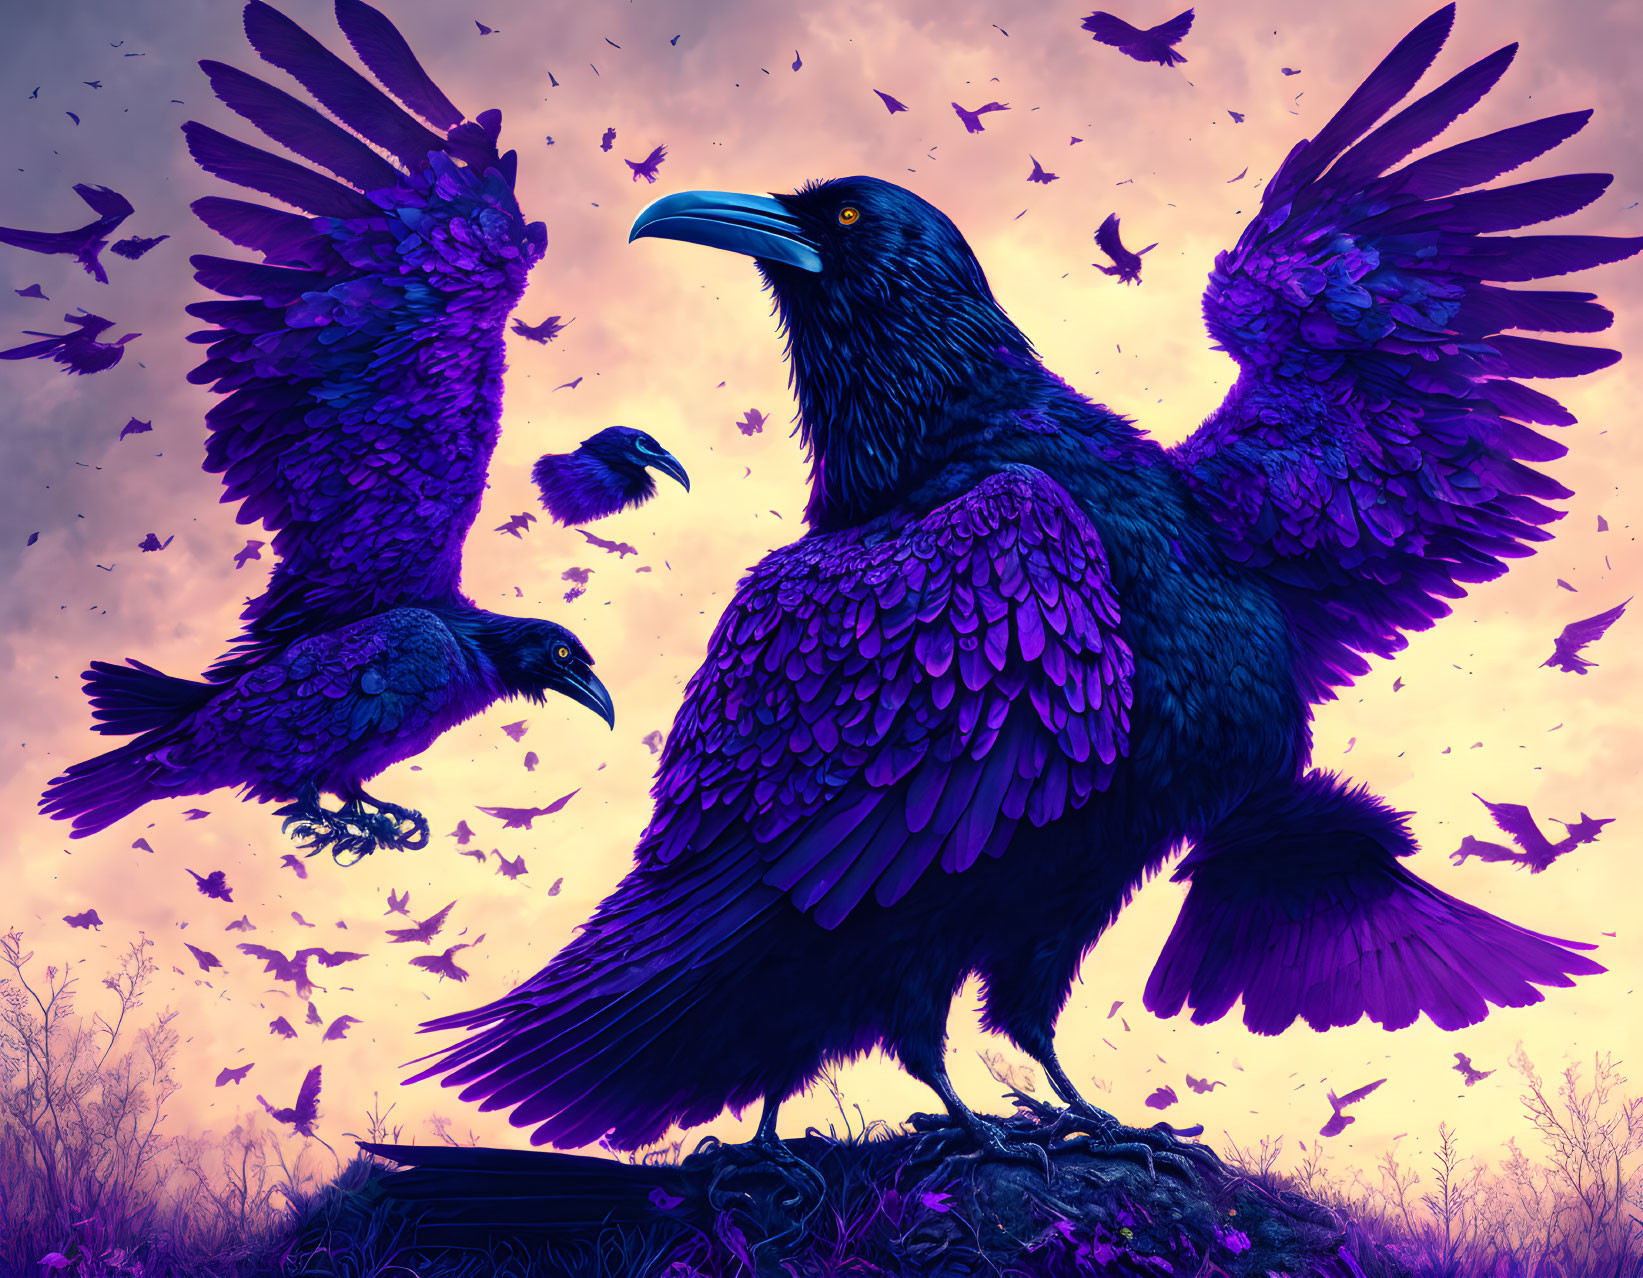 Detailed illustration of large raven with outstretched wings and smaller ravens in a purple sky